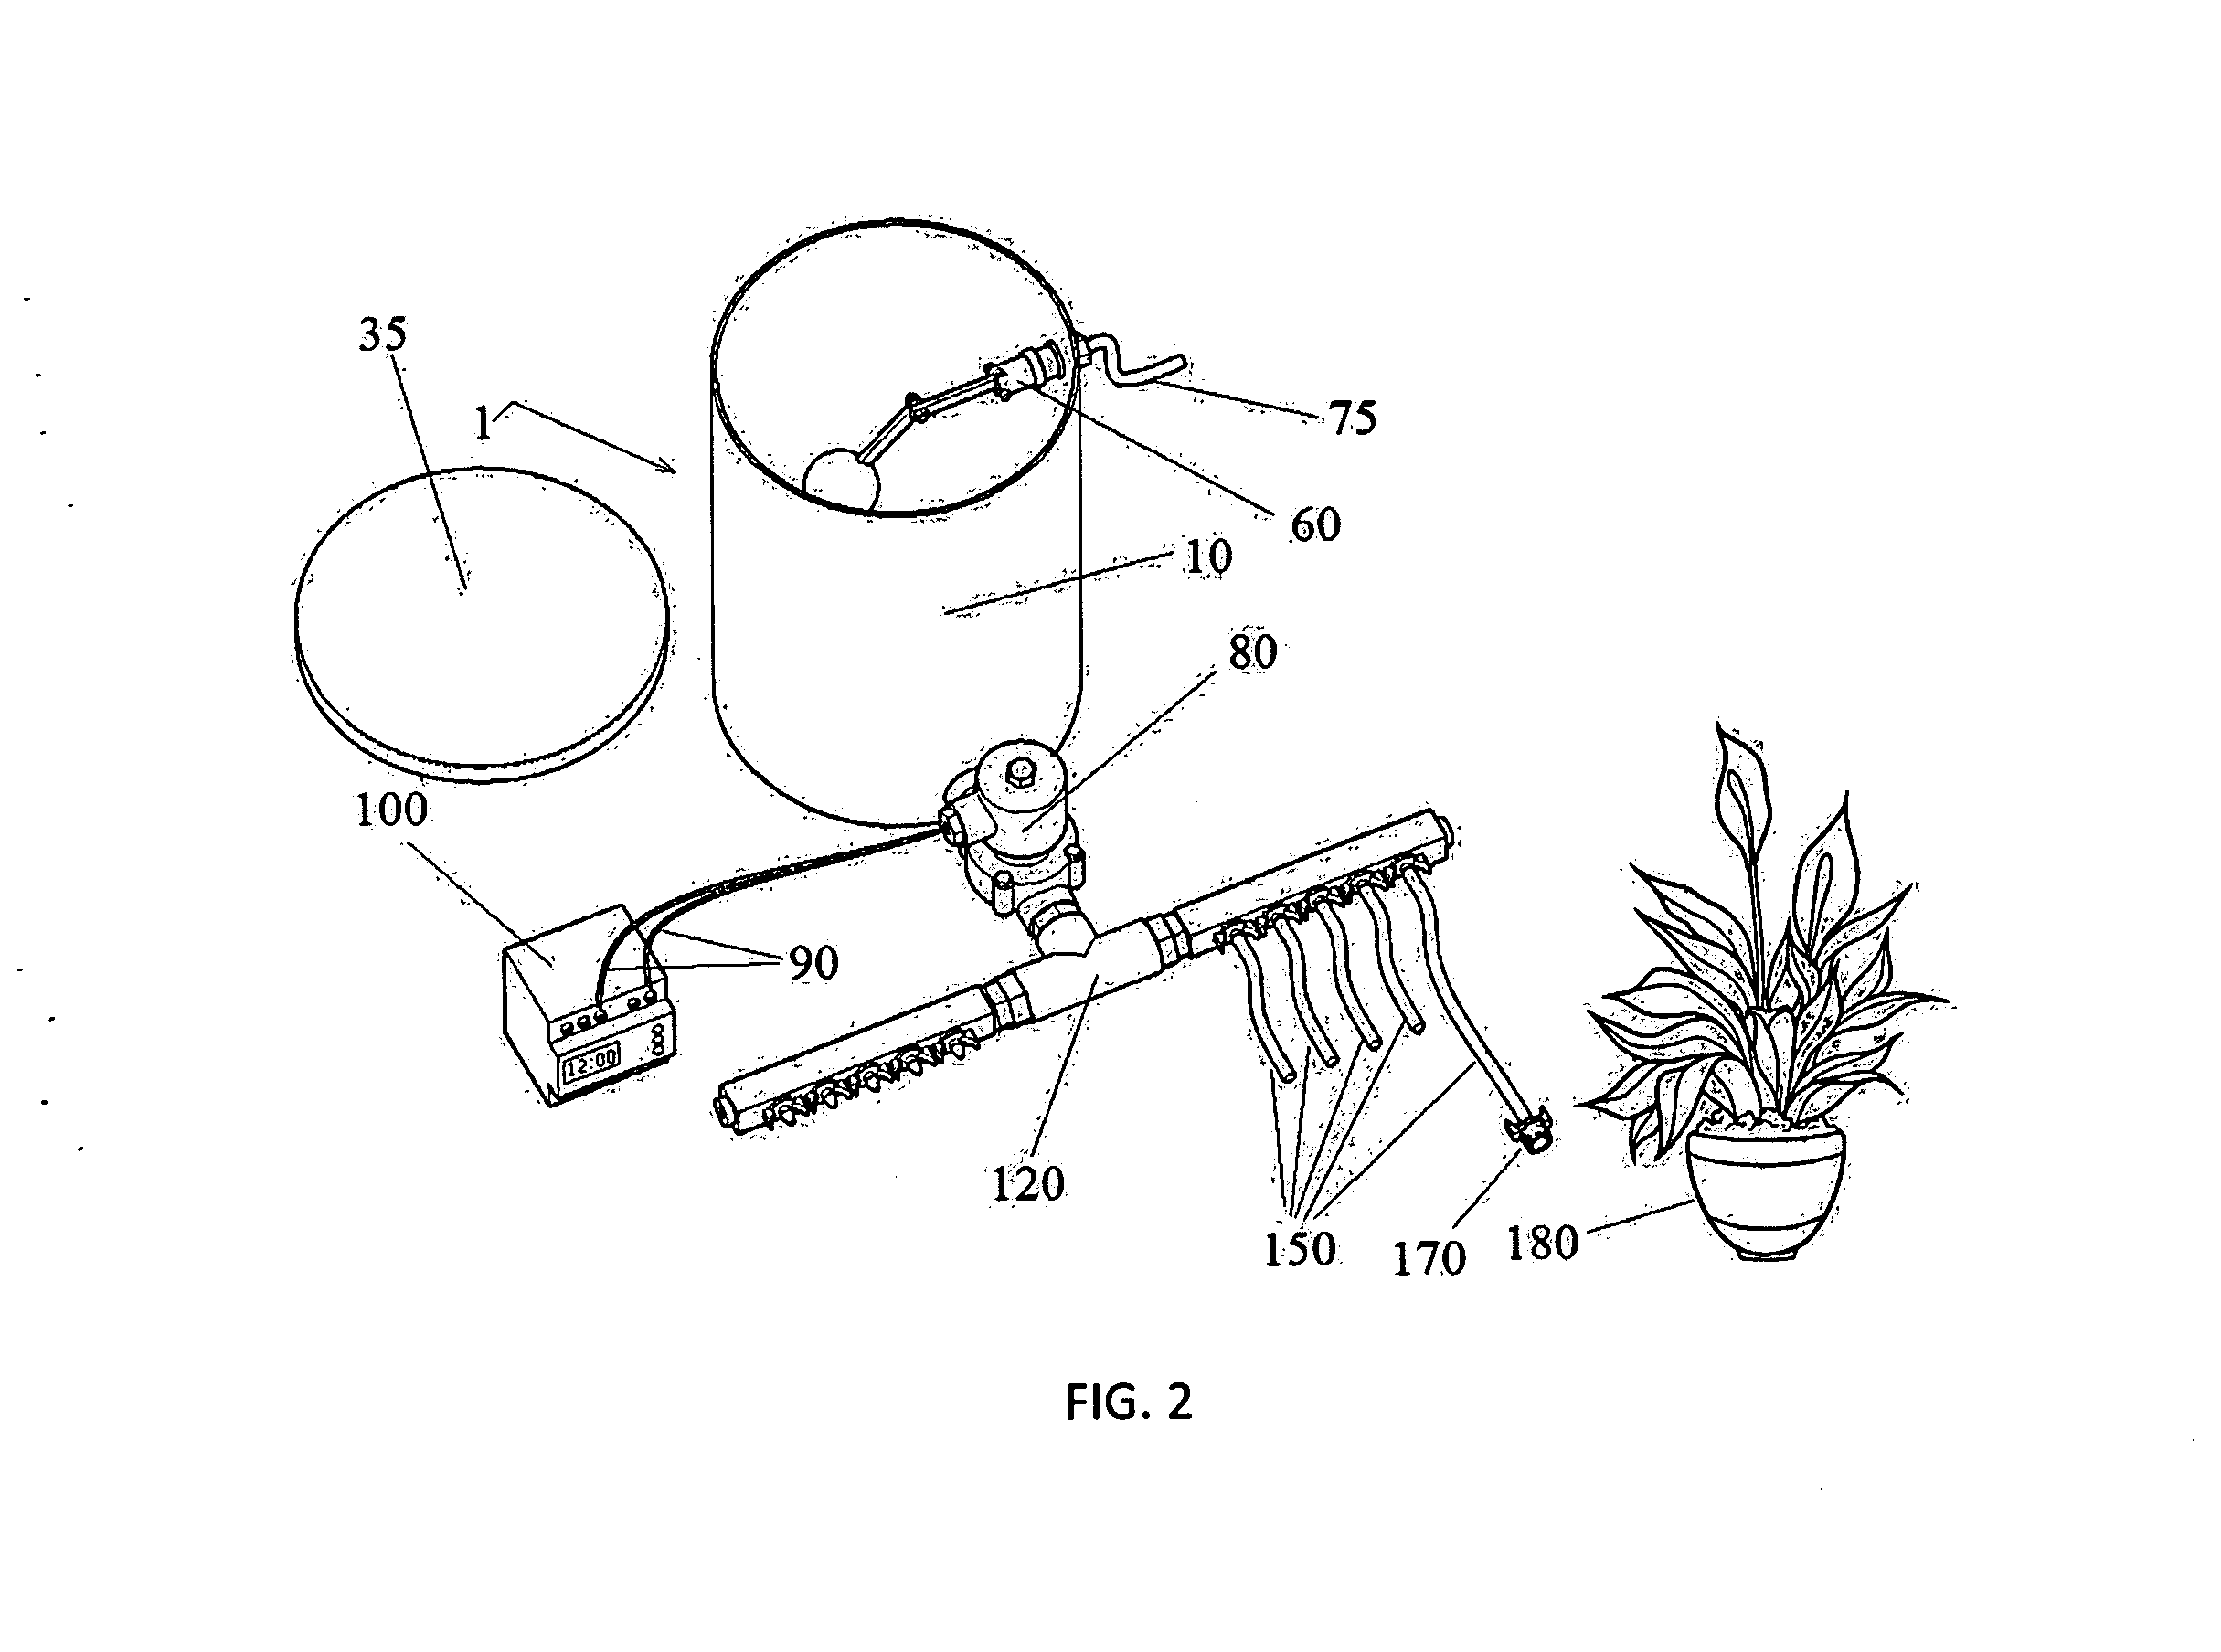 Automatic houseplant watering device